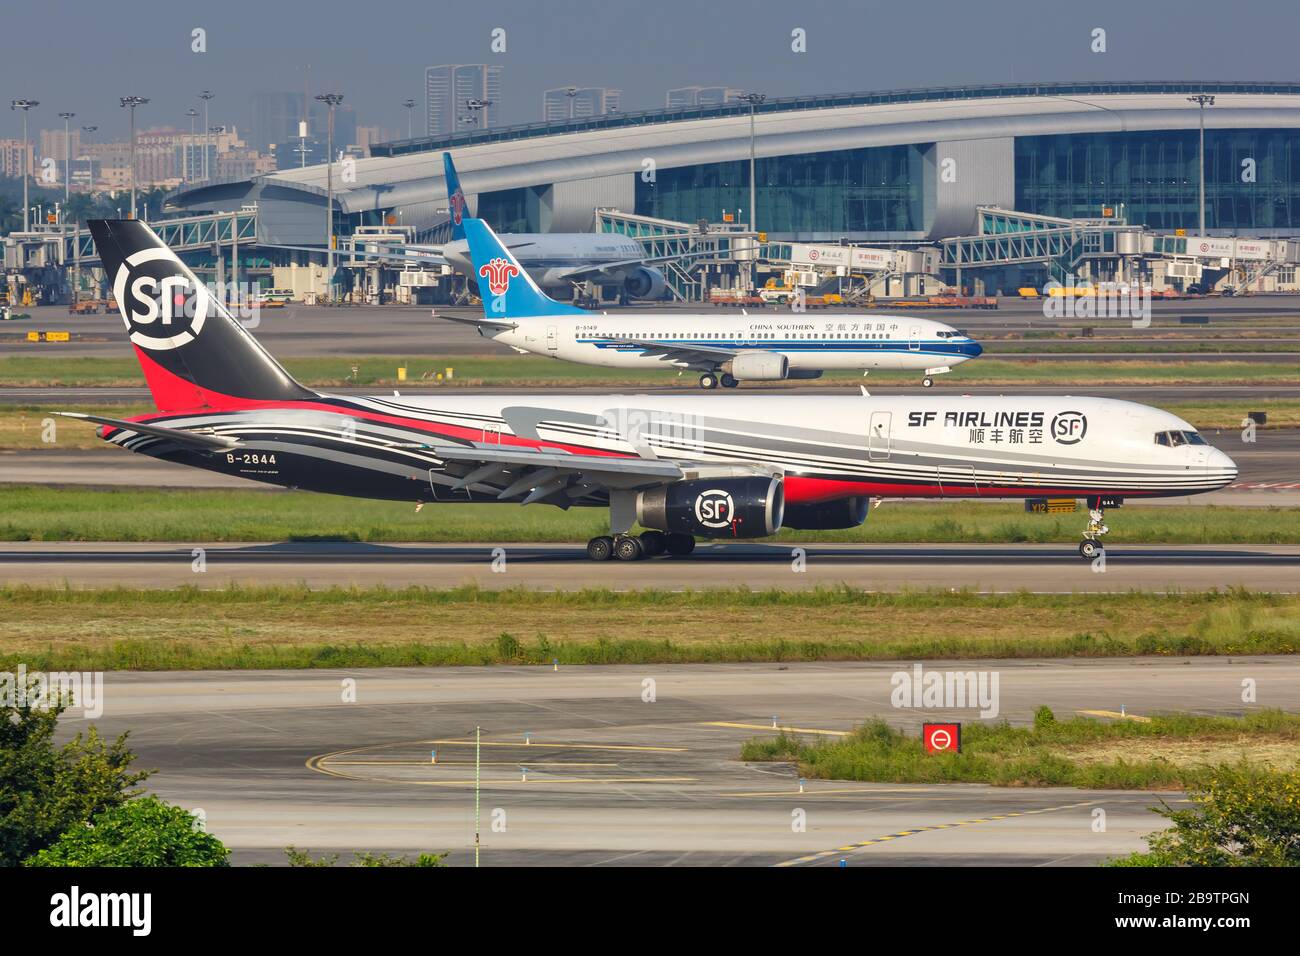 Guangzhou, China – September 24, 2019: SF Airlines Boeing 757-200F airplane at Guangzhou airport (CAN) in China. Boeing is an American aircraft manufa Stock Photo